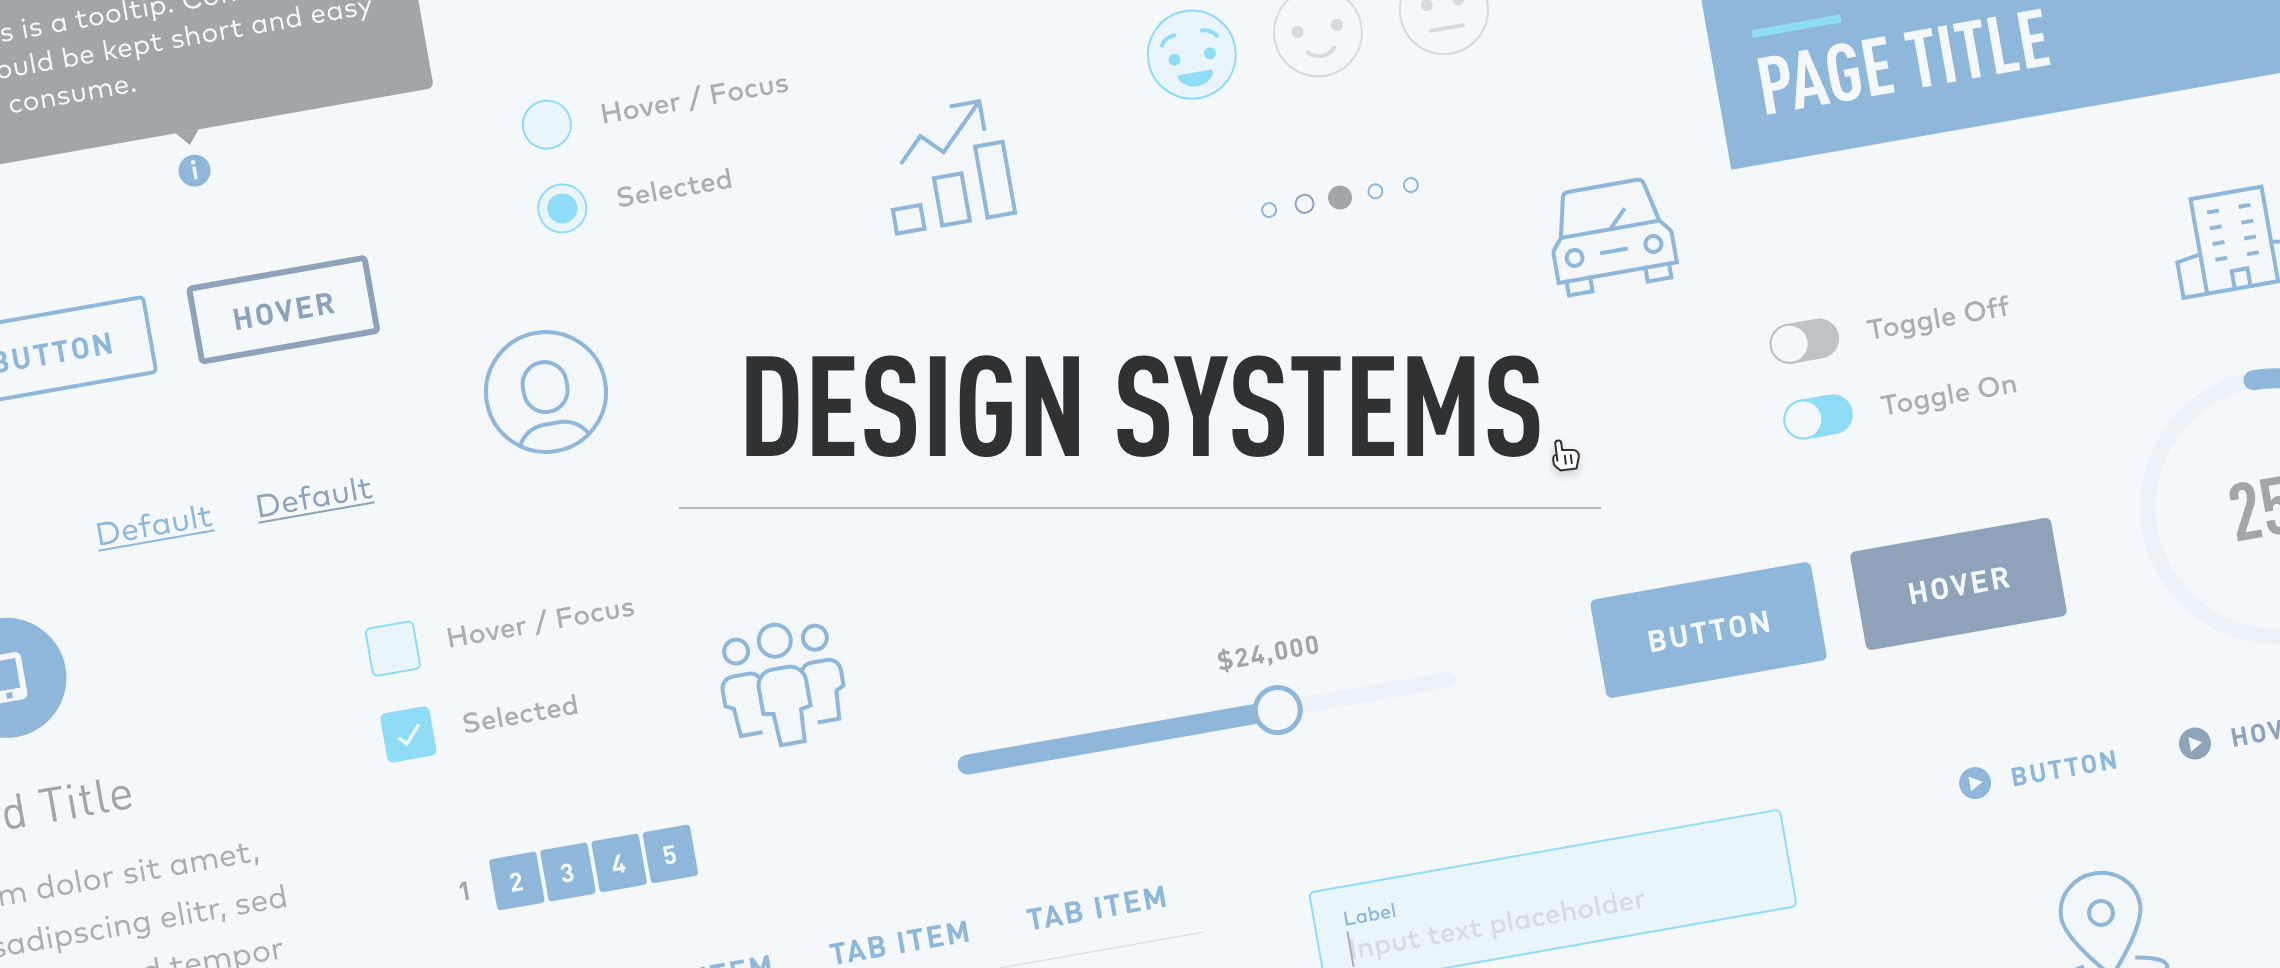 Design Sytems text overlaying an assortment of buttons and icons